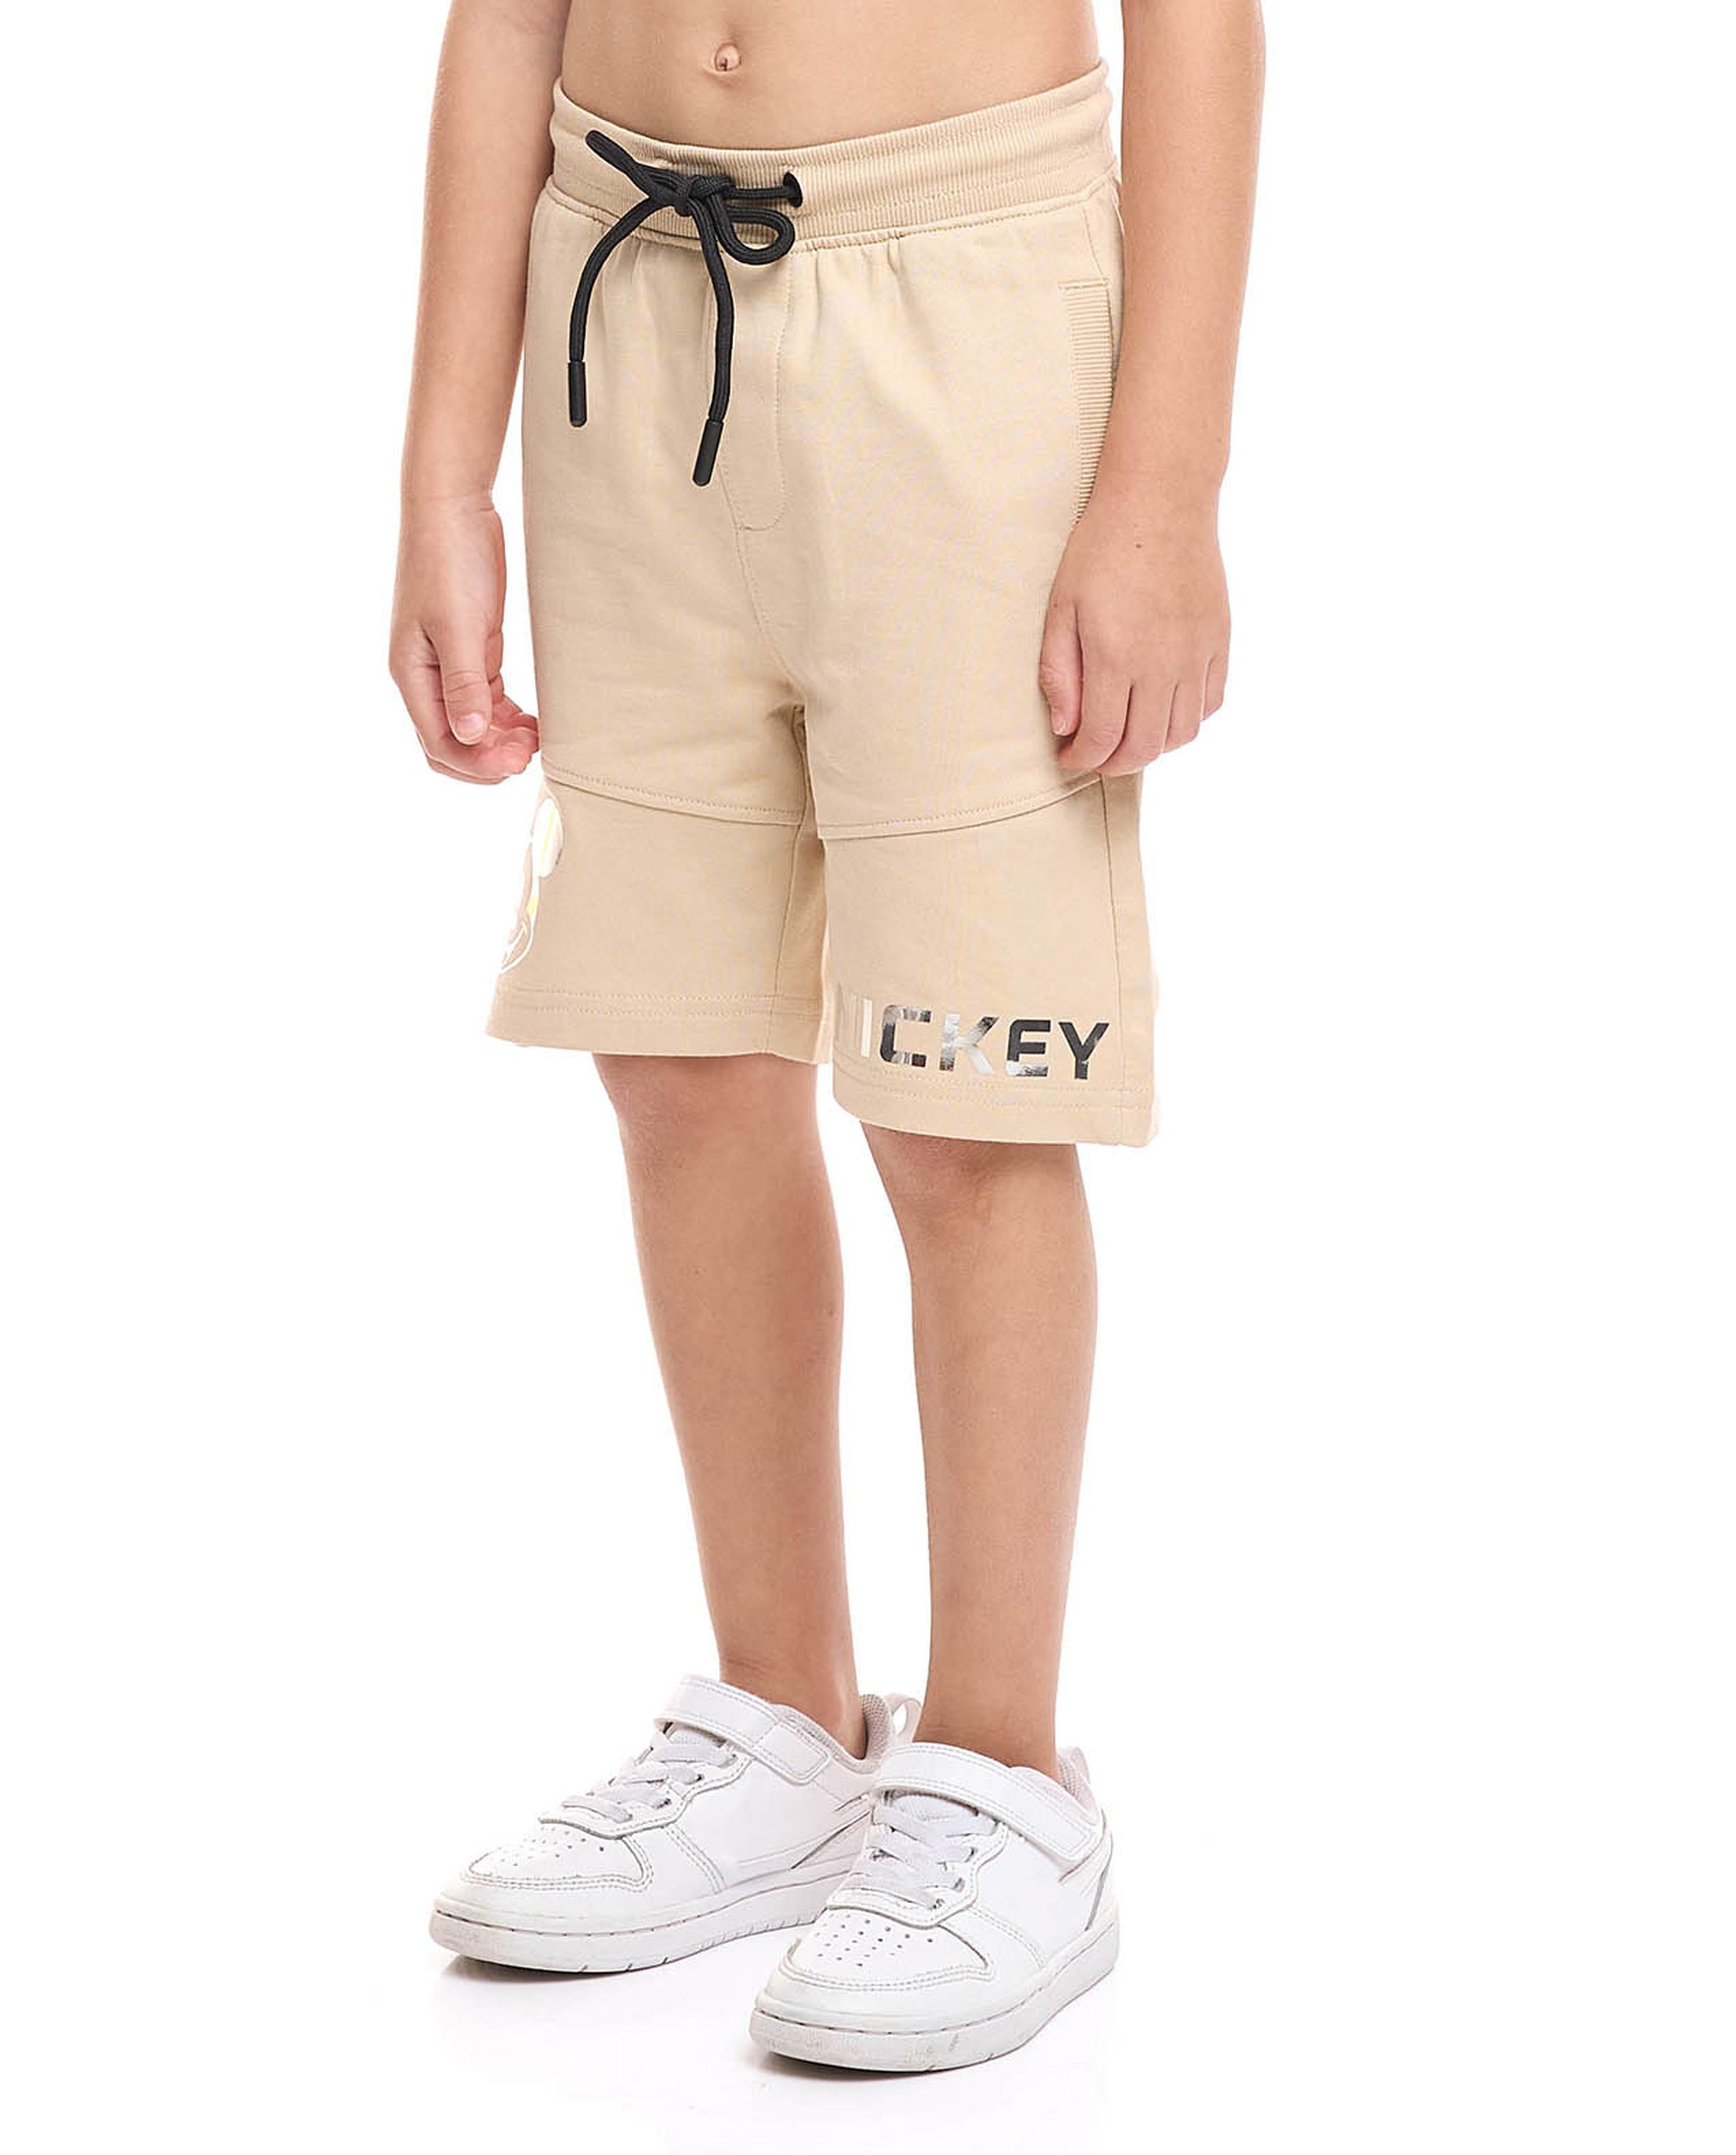 Mickey Mouse Print Shorts with Drawstring Waist